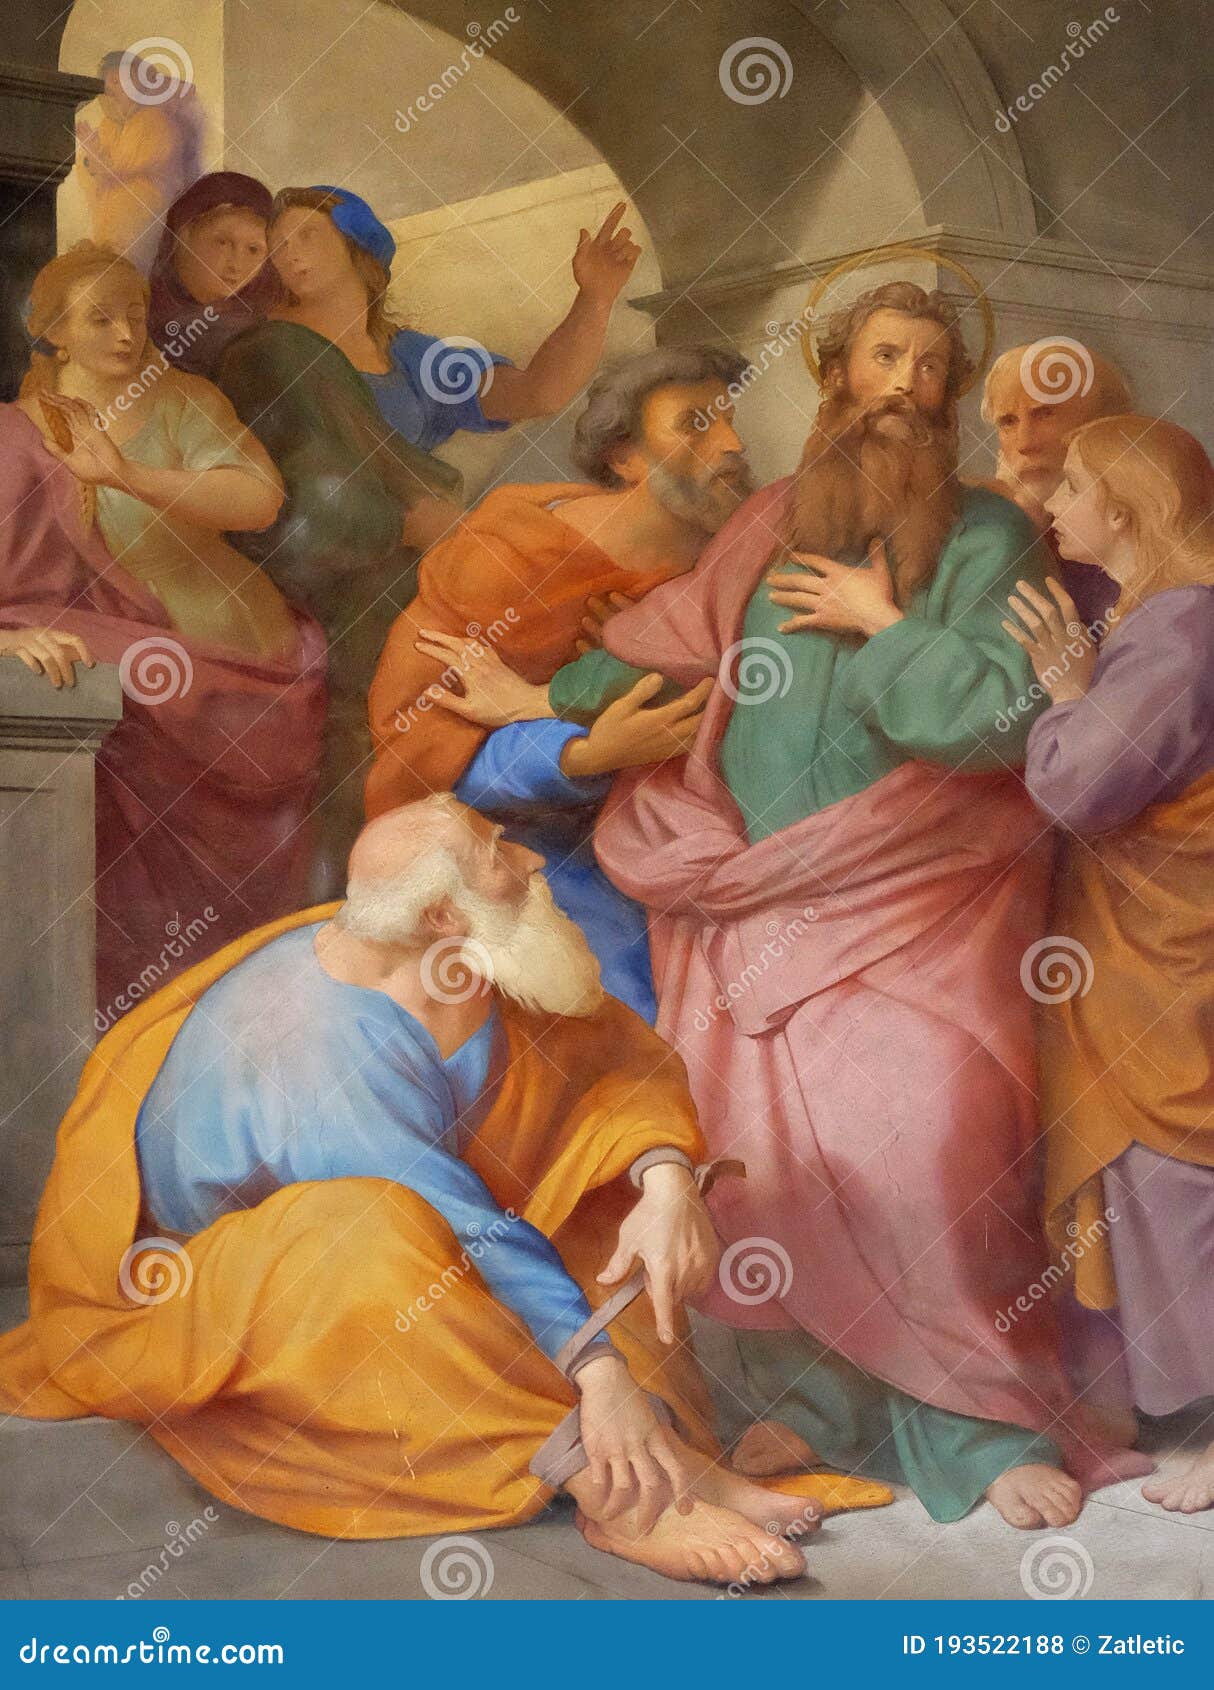 the fresco with the image of the life of st. paul: paul is warned about the jerusalem mob